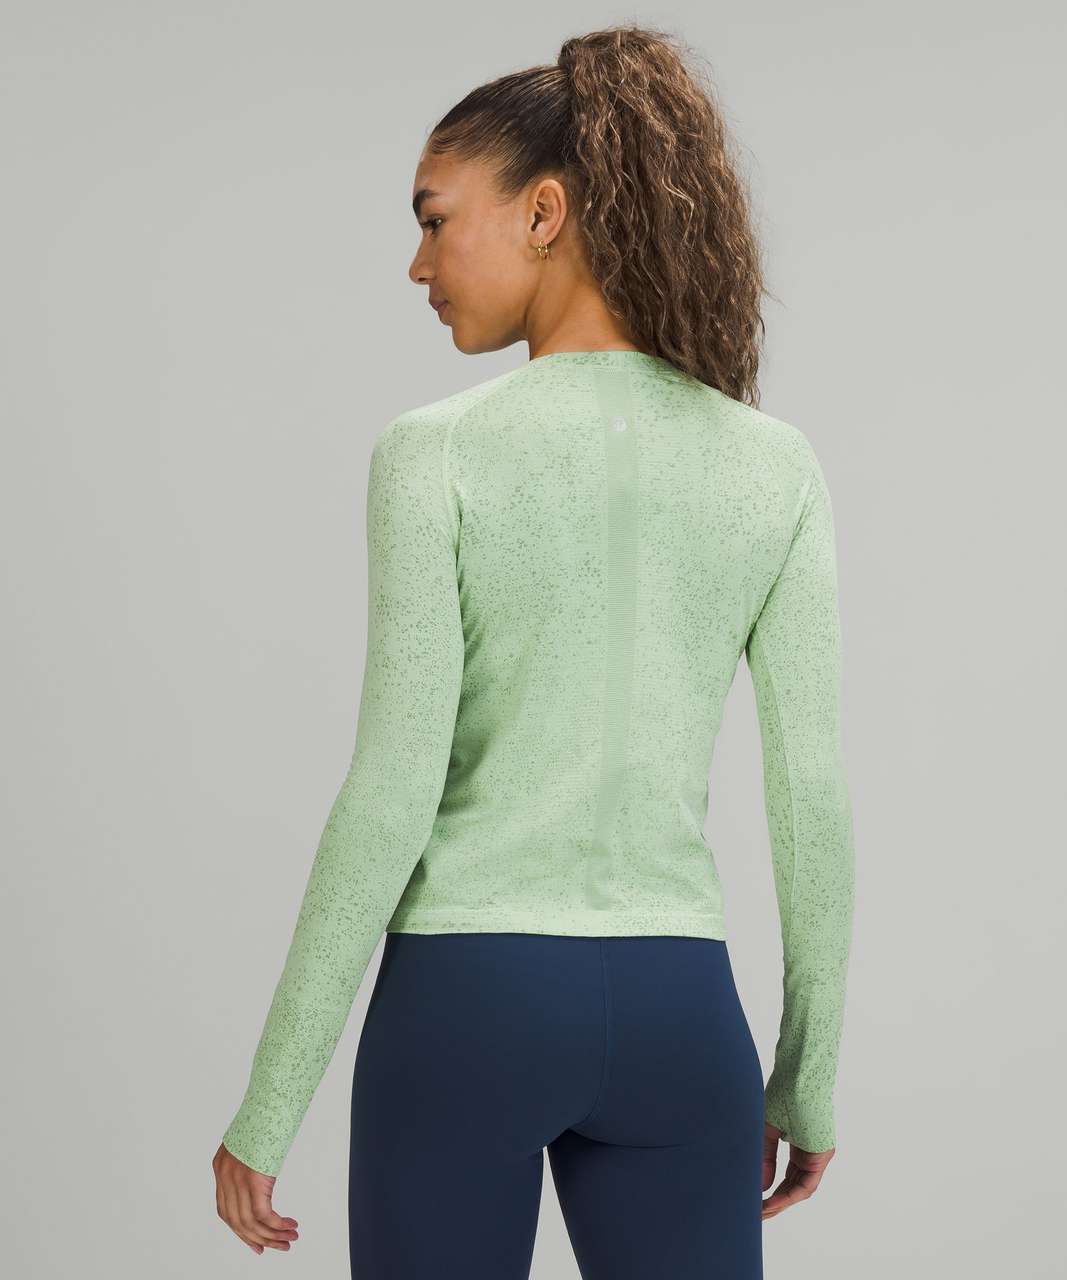 Lululemon Swiftly Tech Long Sleeve Shirt 2.0 *Race Length - Particolour  Everglade Green / Black Size 8 - $71 - From A